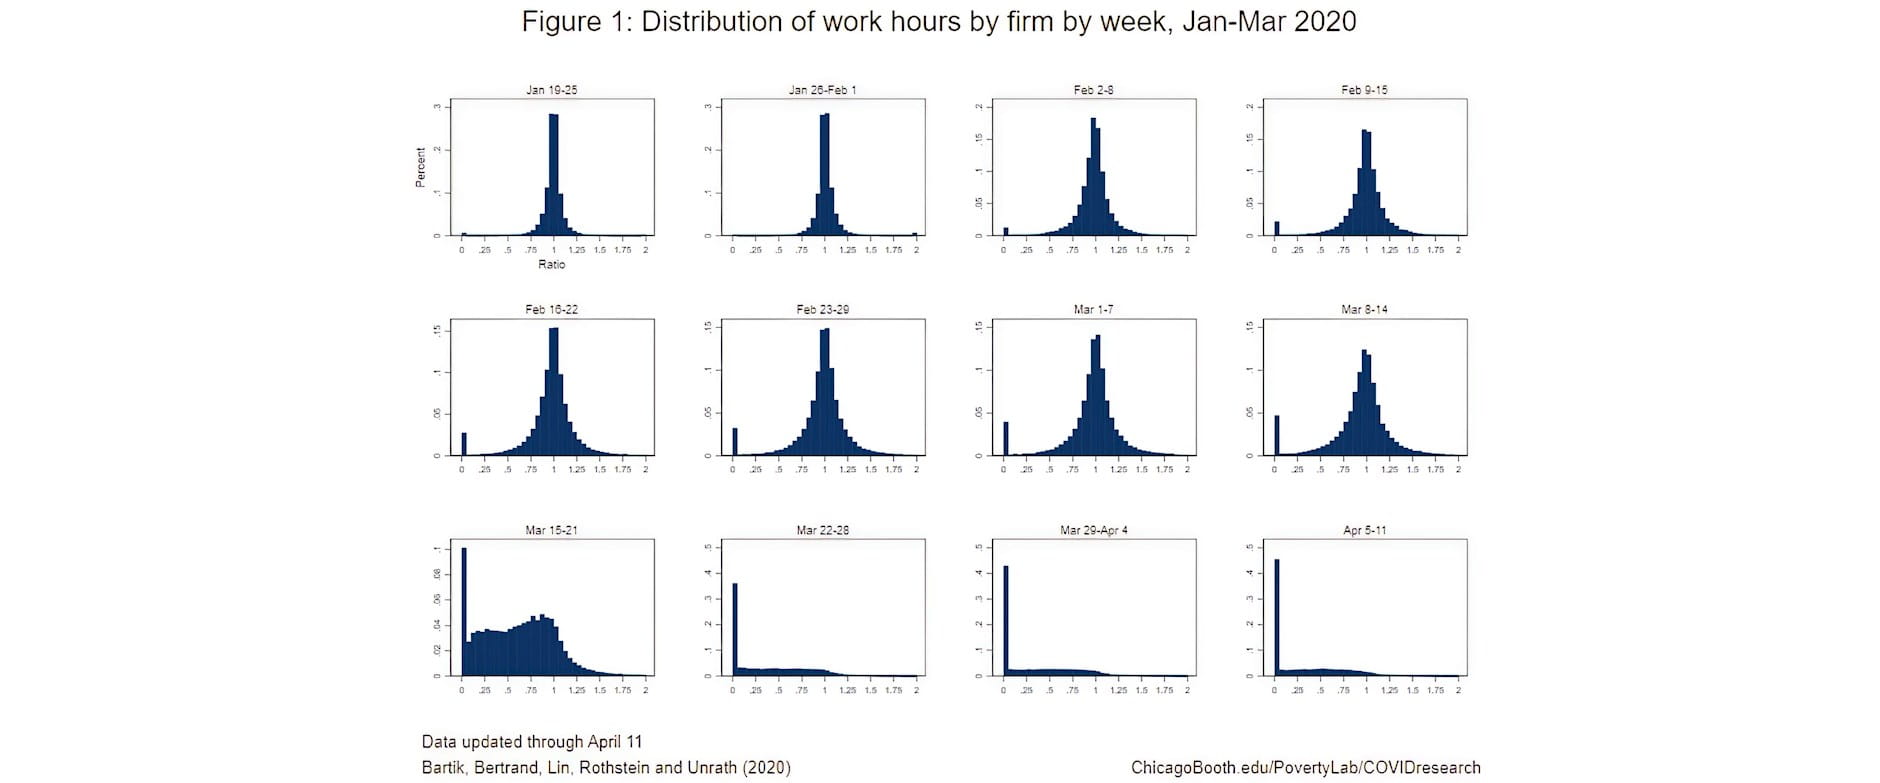 Figure 1: Distribution of work hours by firm by week, Jan-Mar 2020